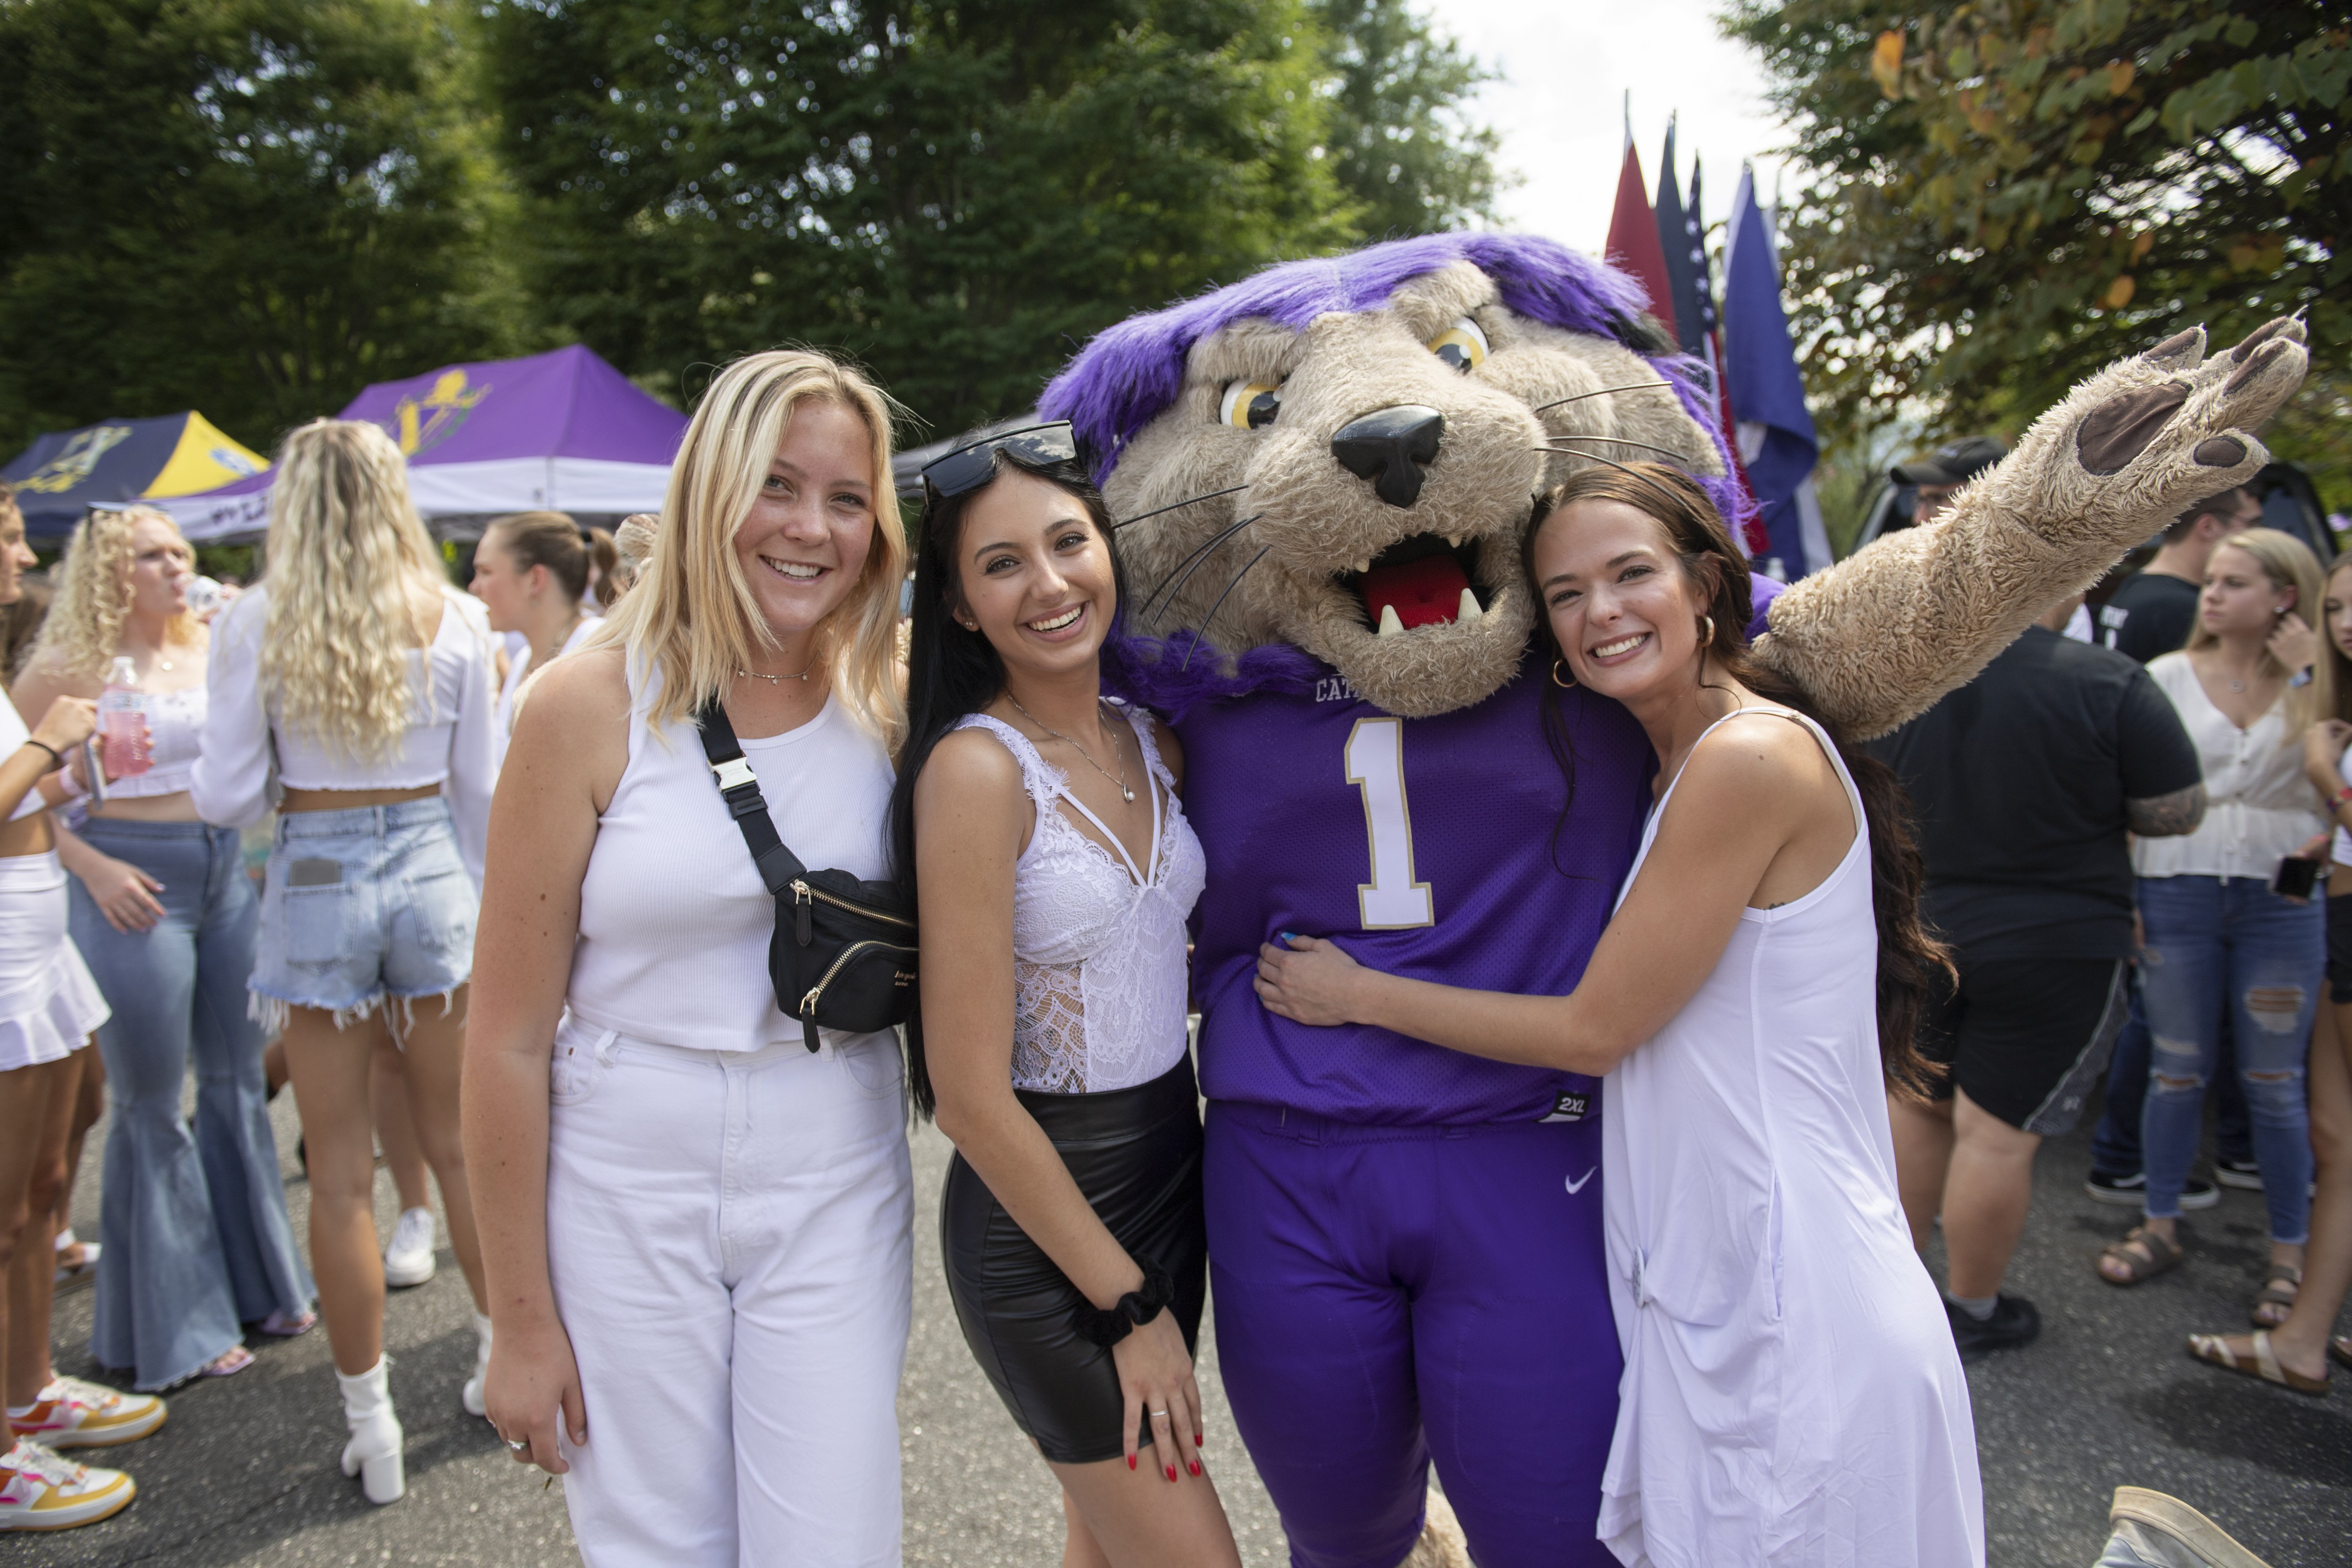 Students tailgating with Paws